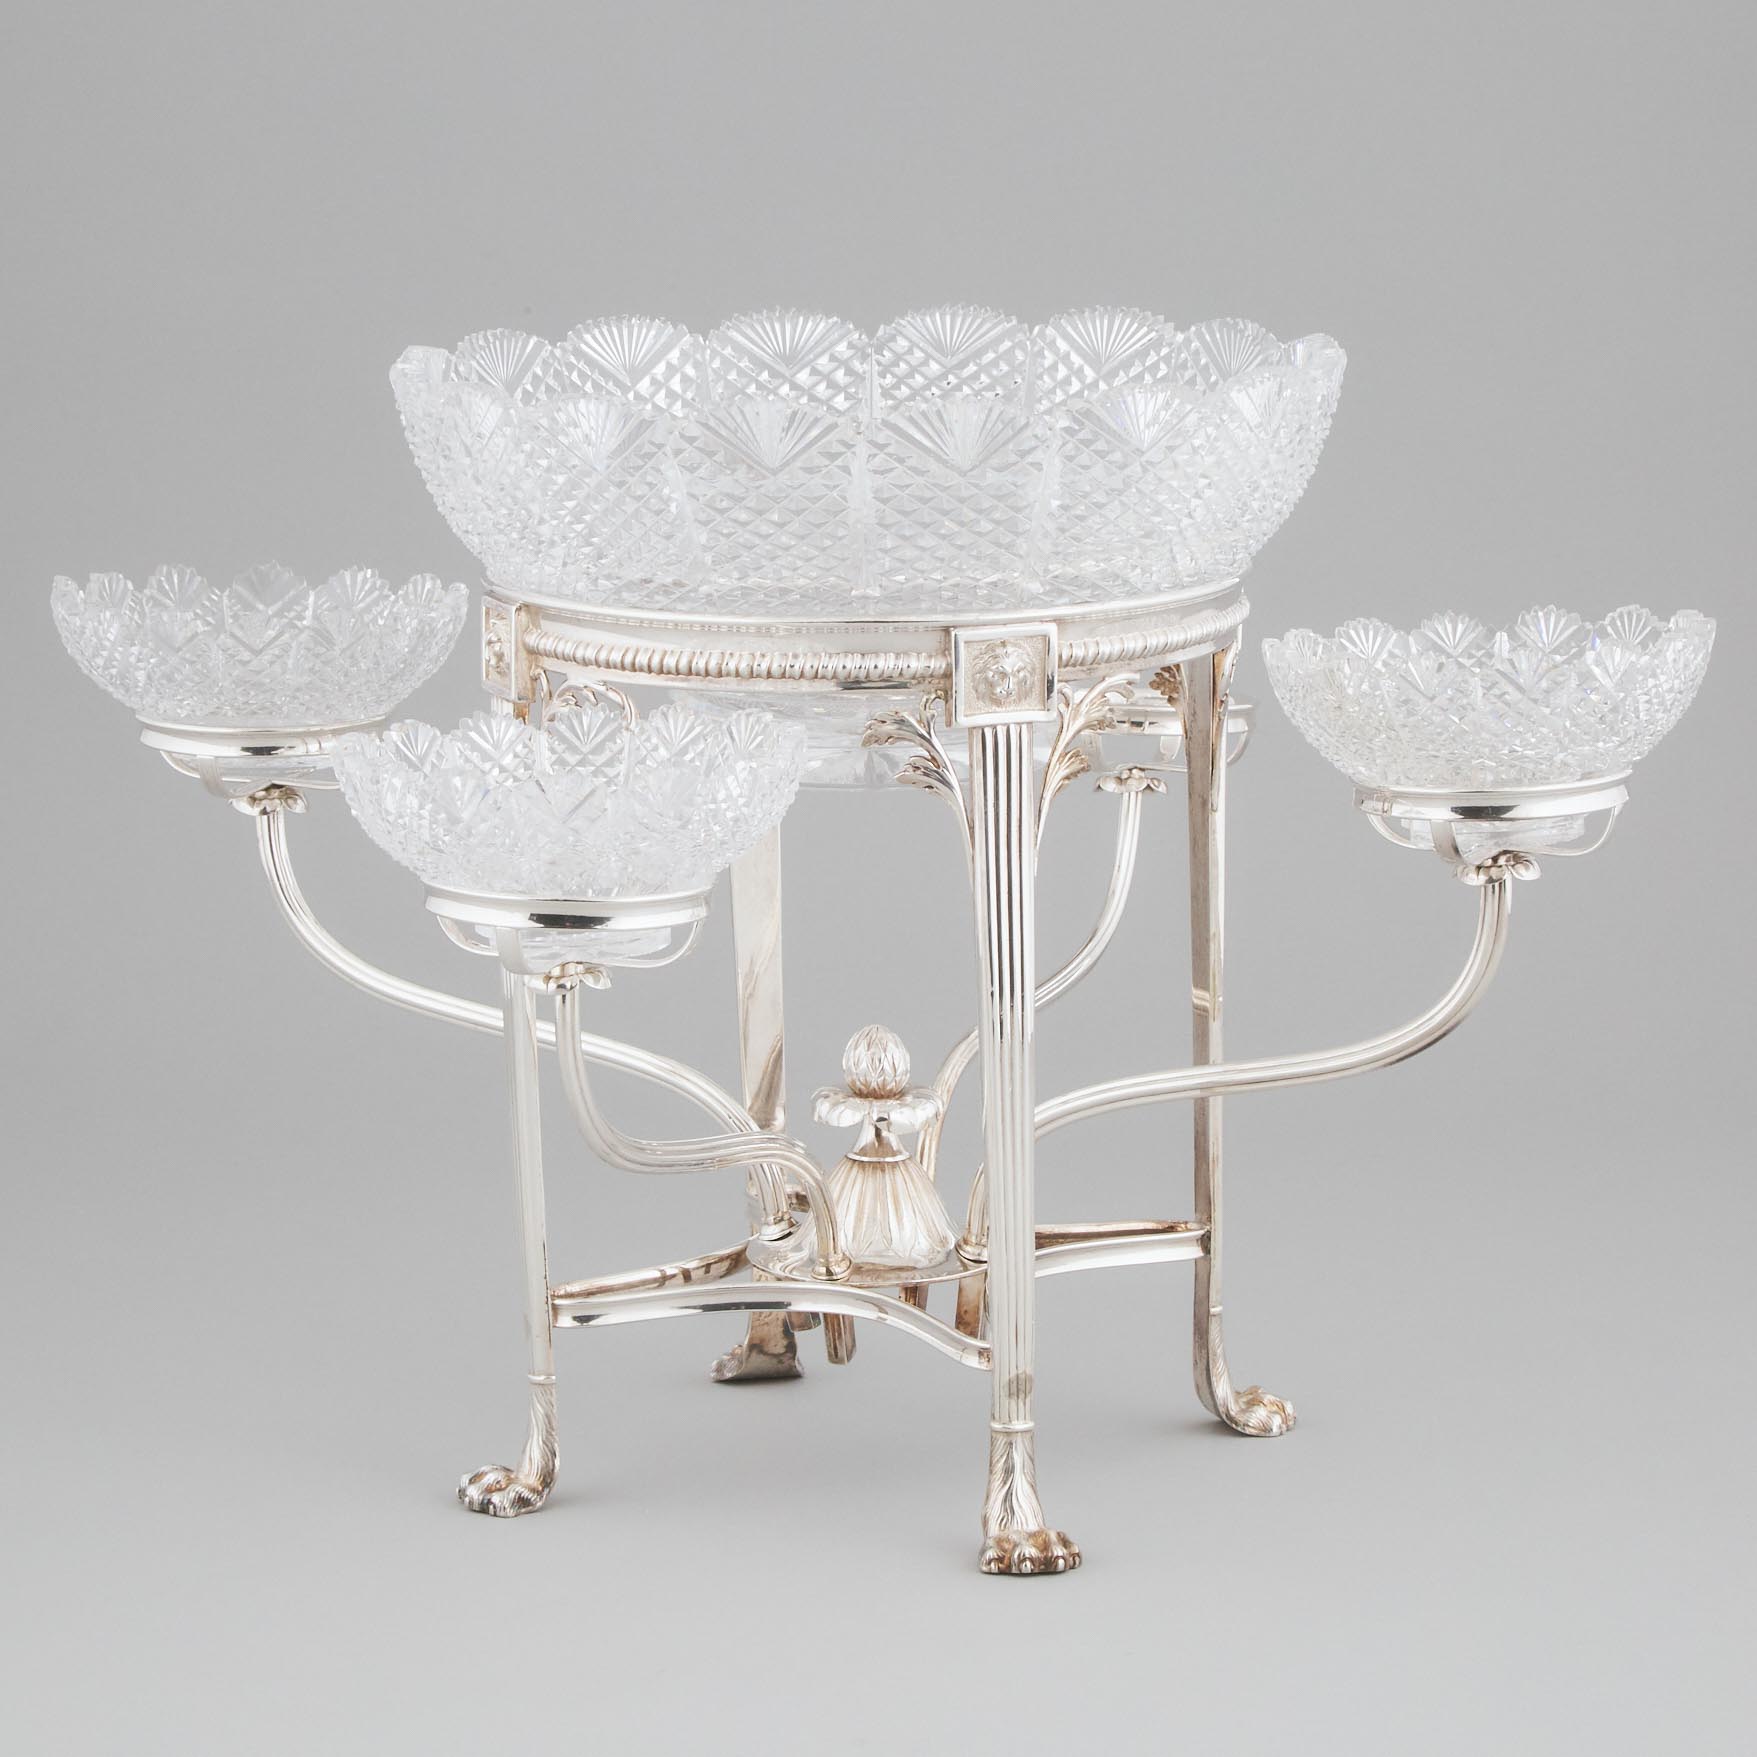 George III Silver and Cut Glass Epergne, Matthew Boulton, 1802